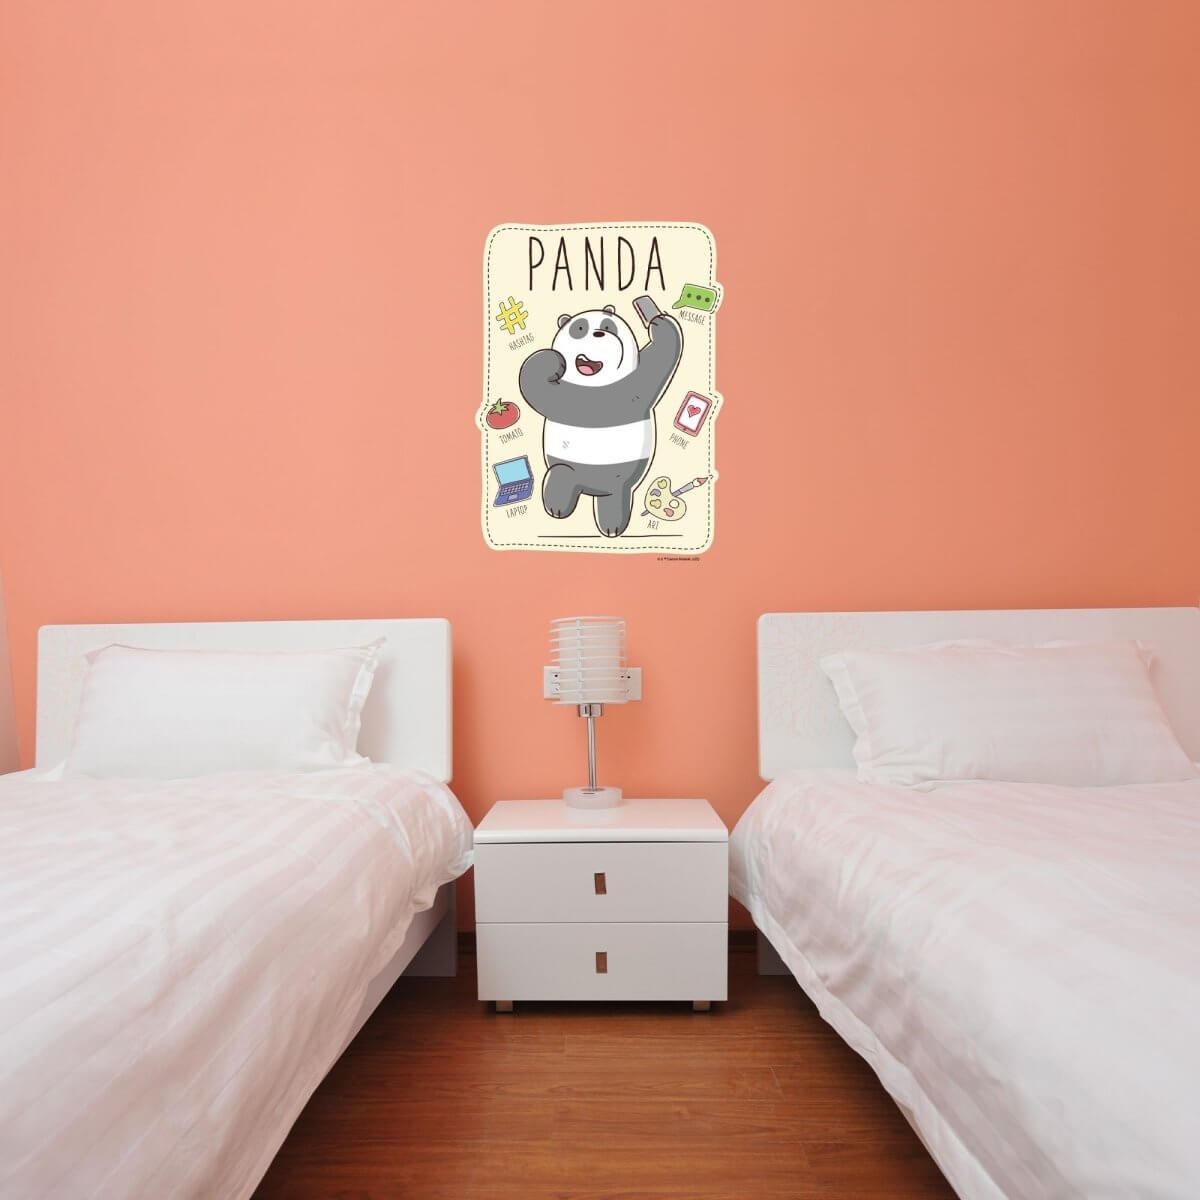 Kismet Decals Home & Room Decor We Bare Bears Panda's Favorites Wall decal sticker - officially licensed - latex printed with no solvent odor - Kismet Decals